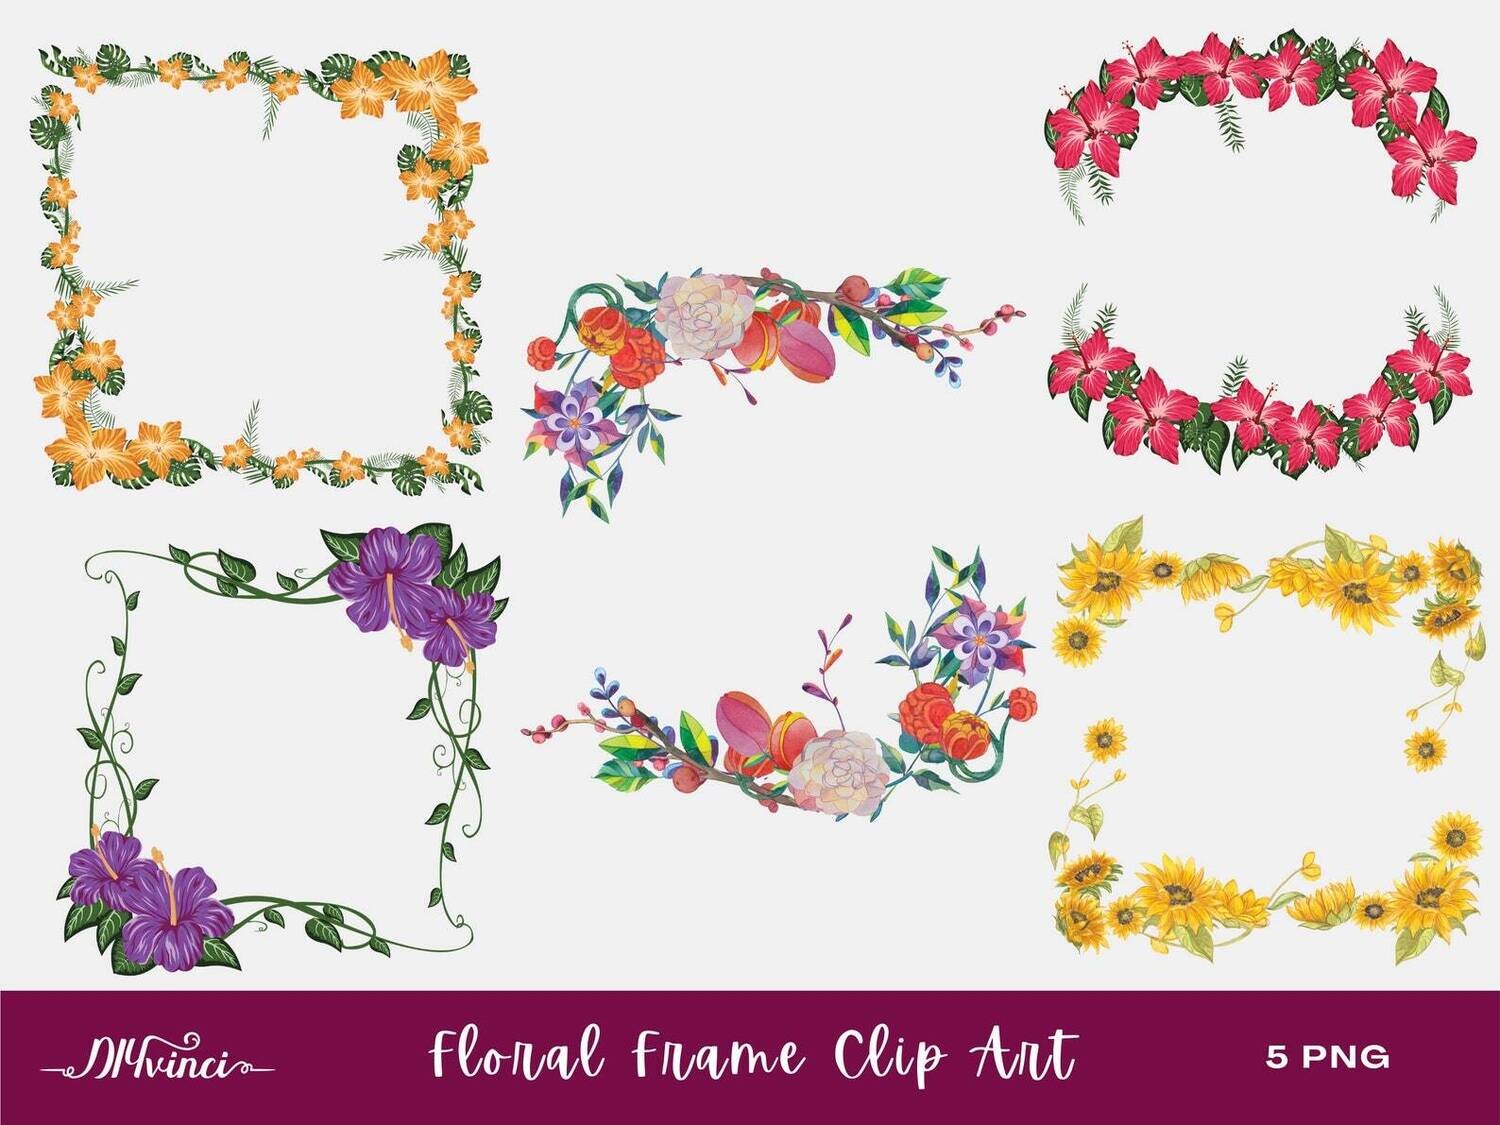 Floral Frame Clip Art - 5 PNG - Personal & Commercial Use